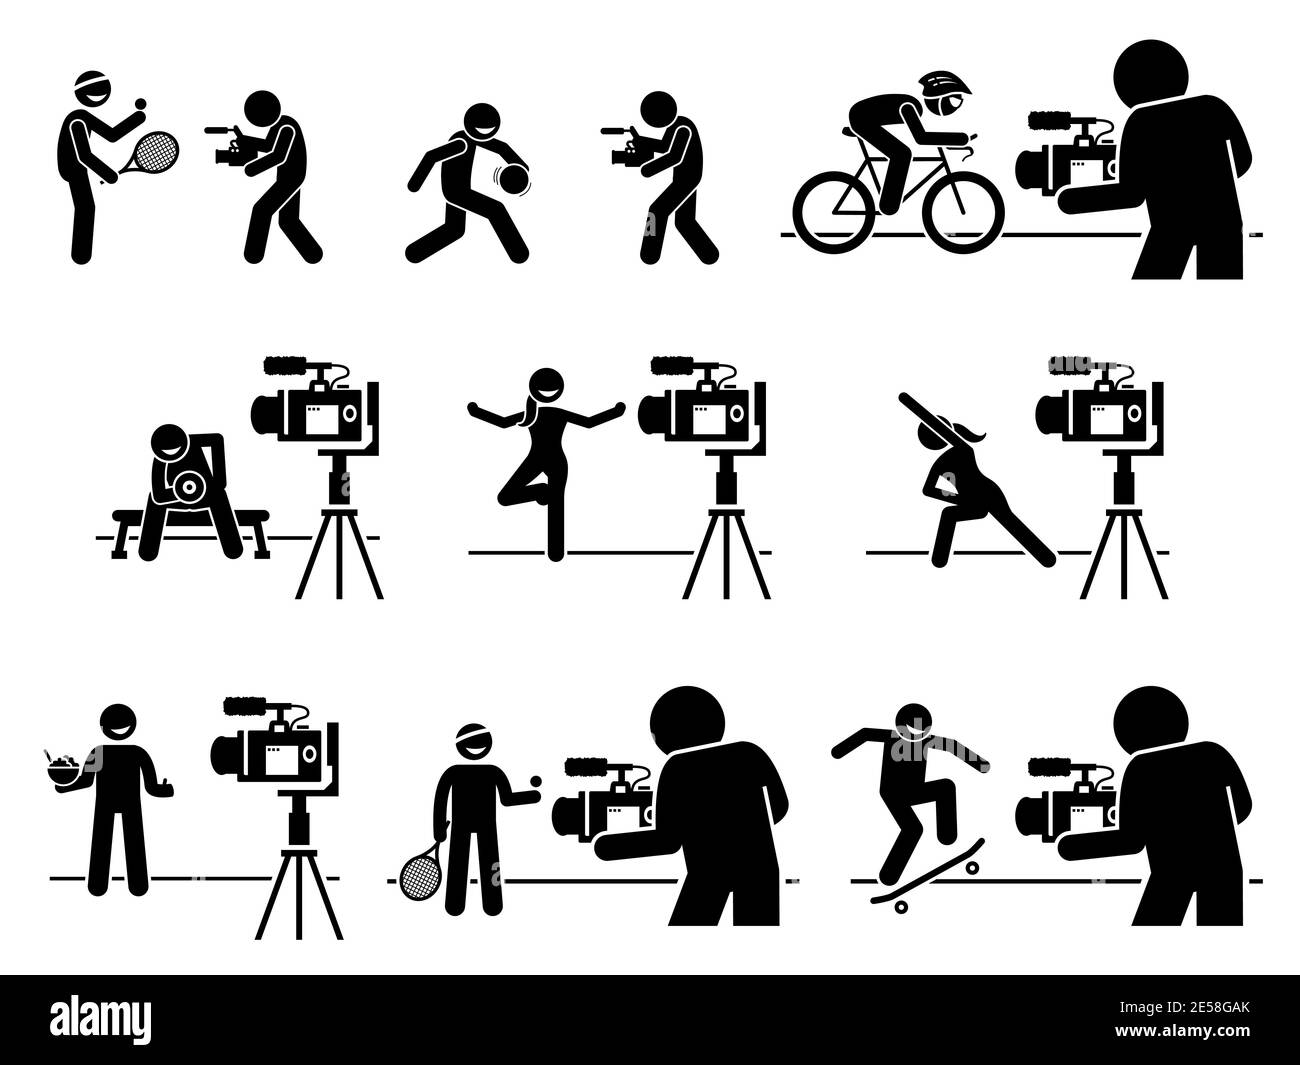 Social media sports, diet, and fitness influencers Internet video content creator pictogram. Vector illustrations of man and woman creating video by t Stock Vector